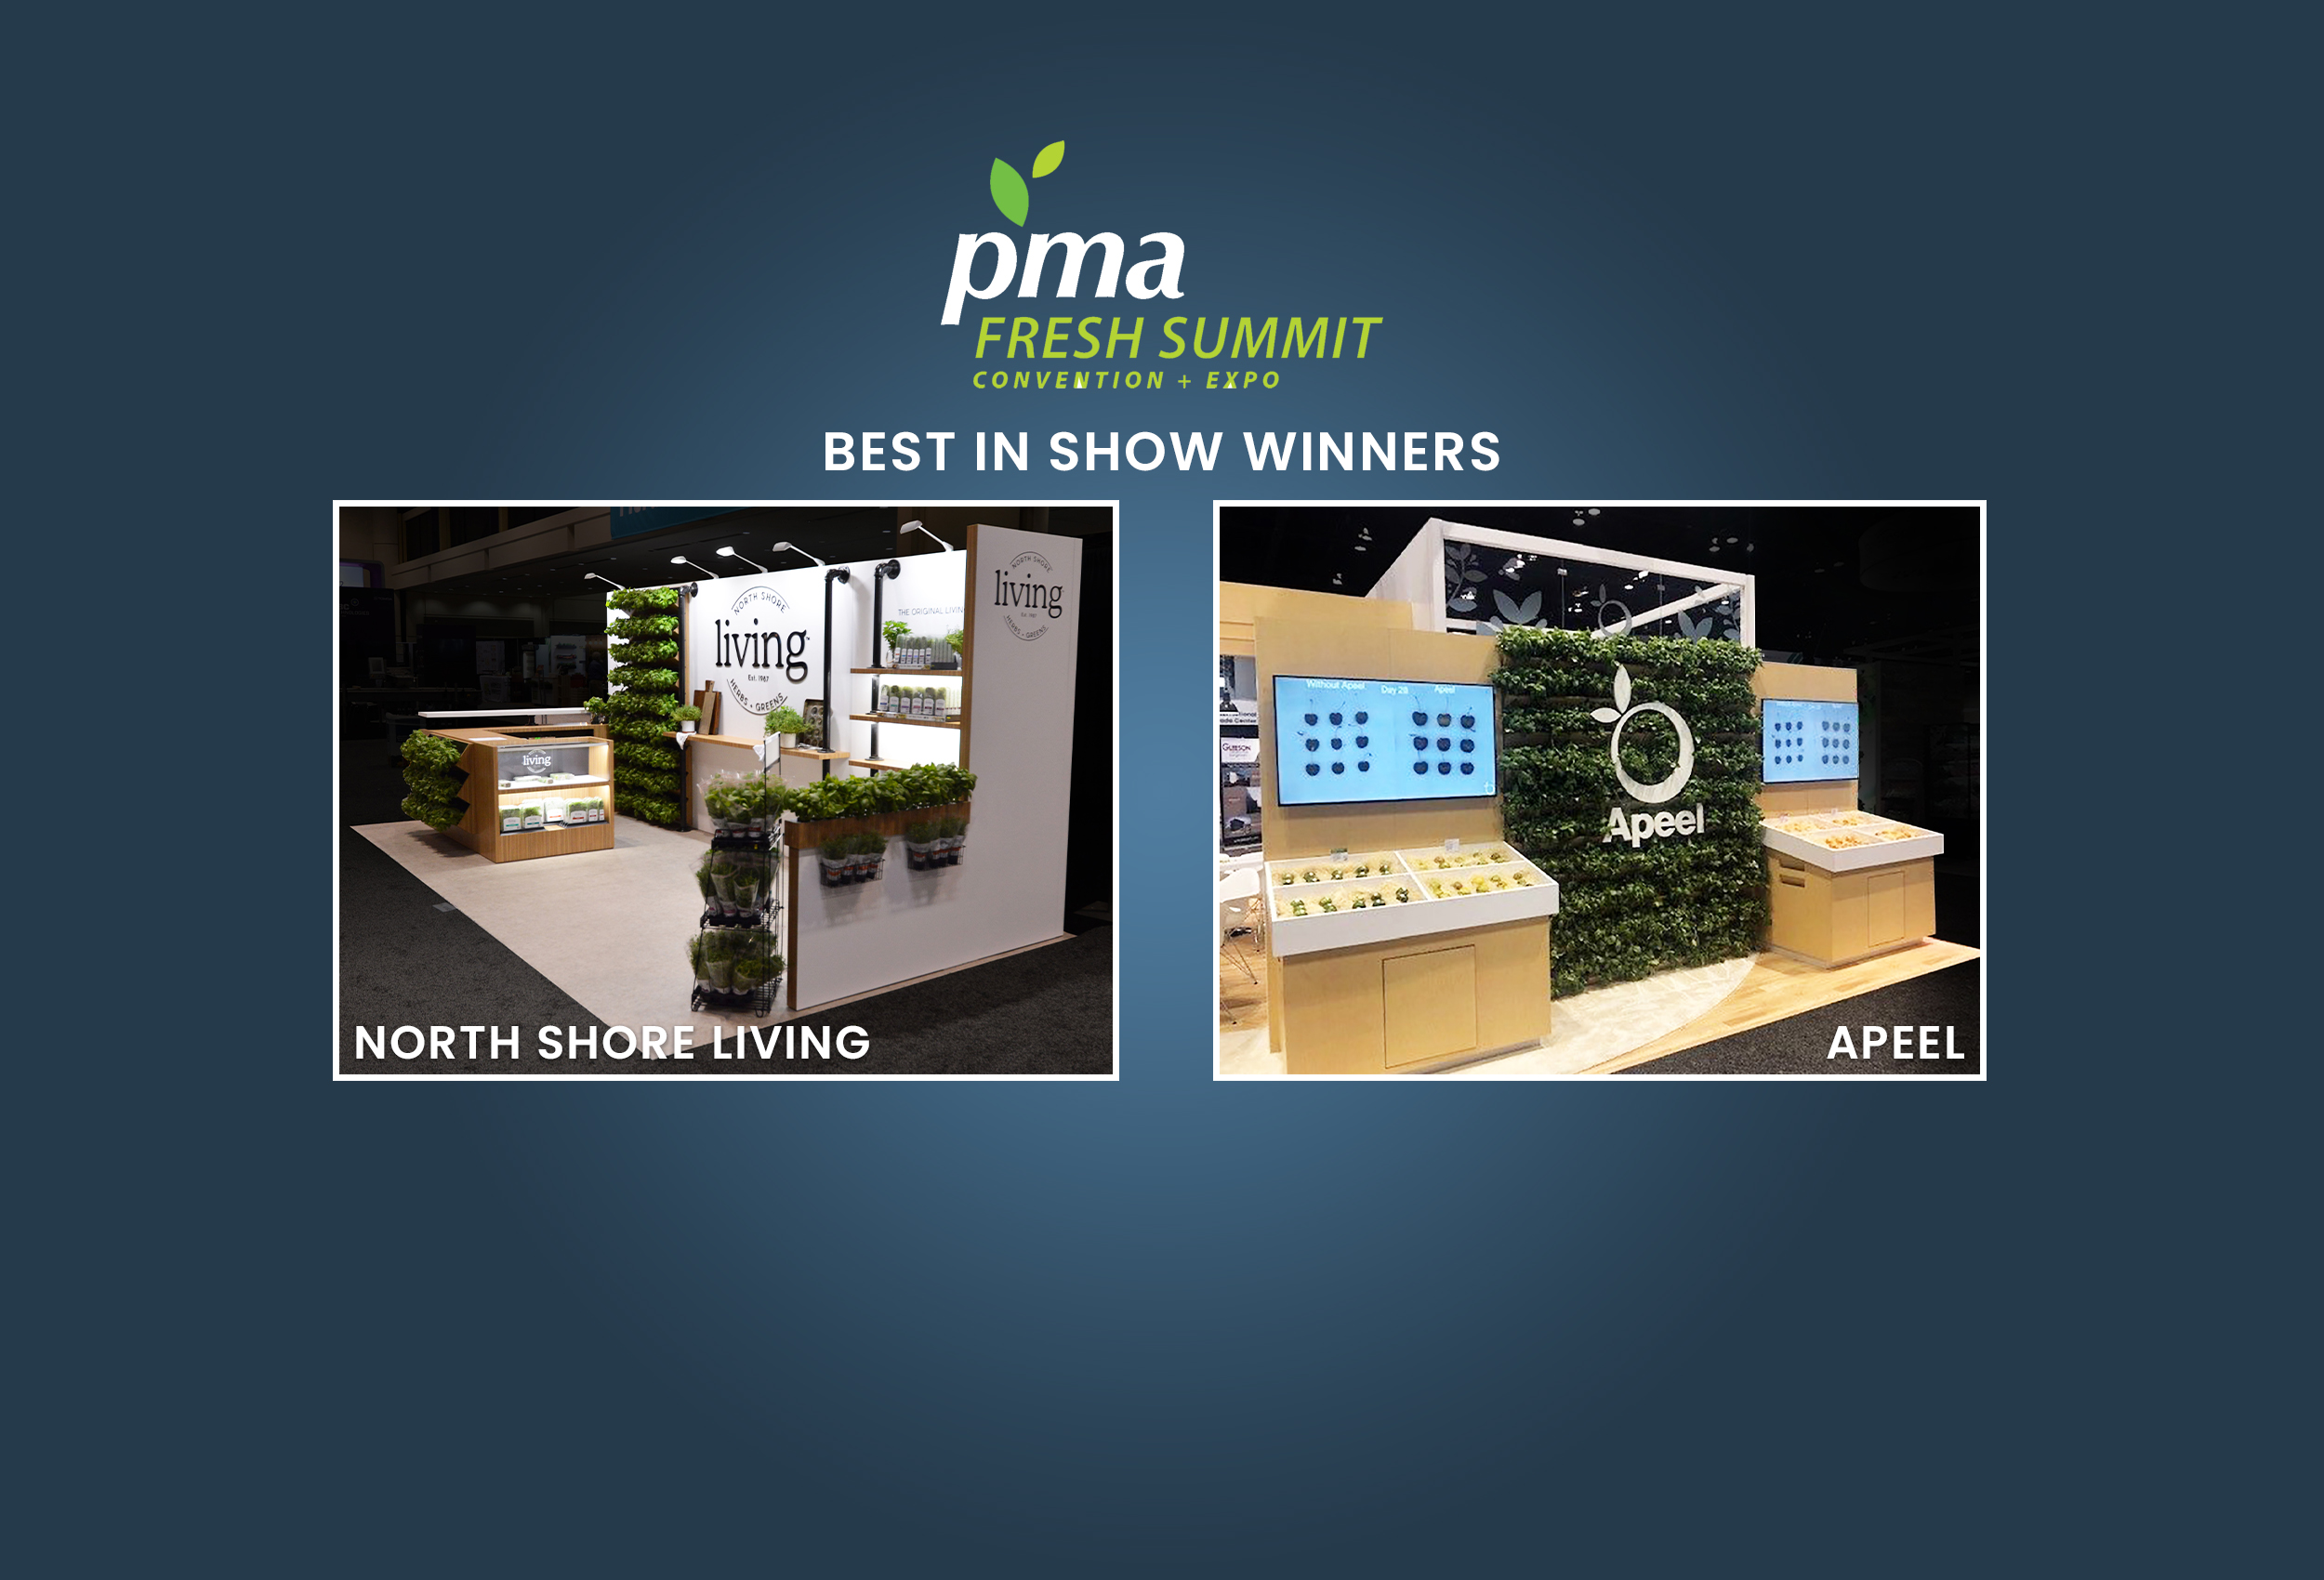 2020-Exhibits-PMA-Fresh-Summit-Exhibits-Win-Category-Best-in-Show_2500x1700_V2